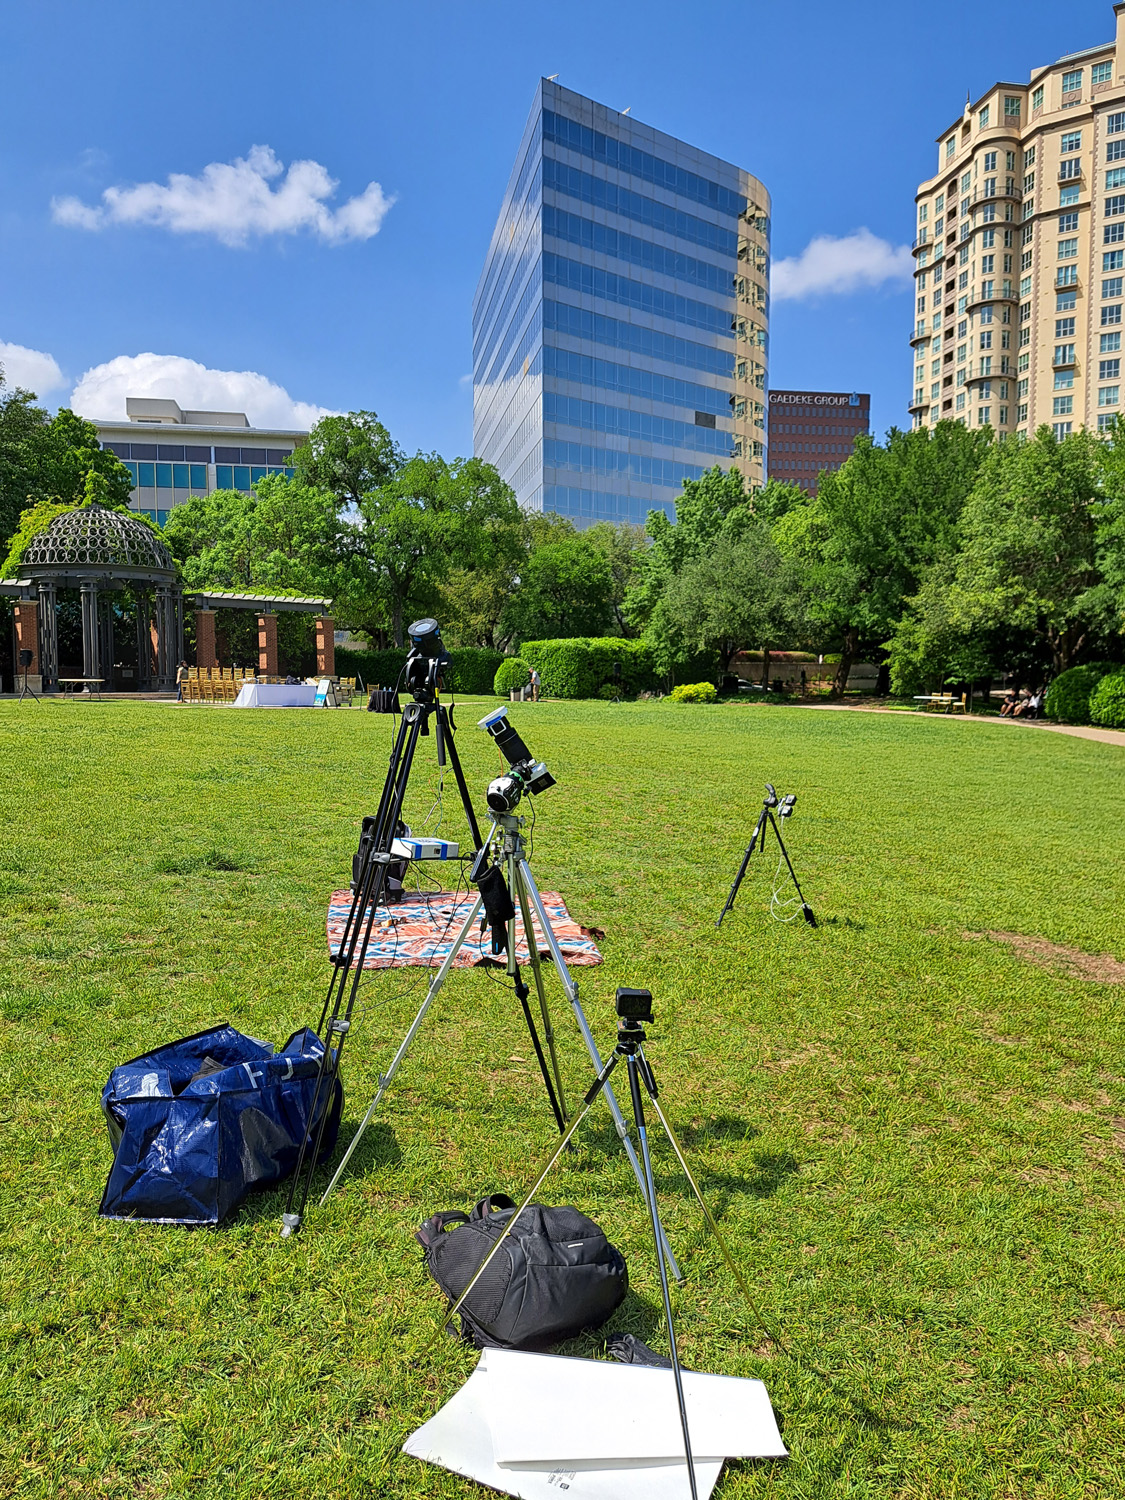 Multiple tripods and cameras on an empty green field, surrounded by trees and buildings.